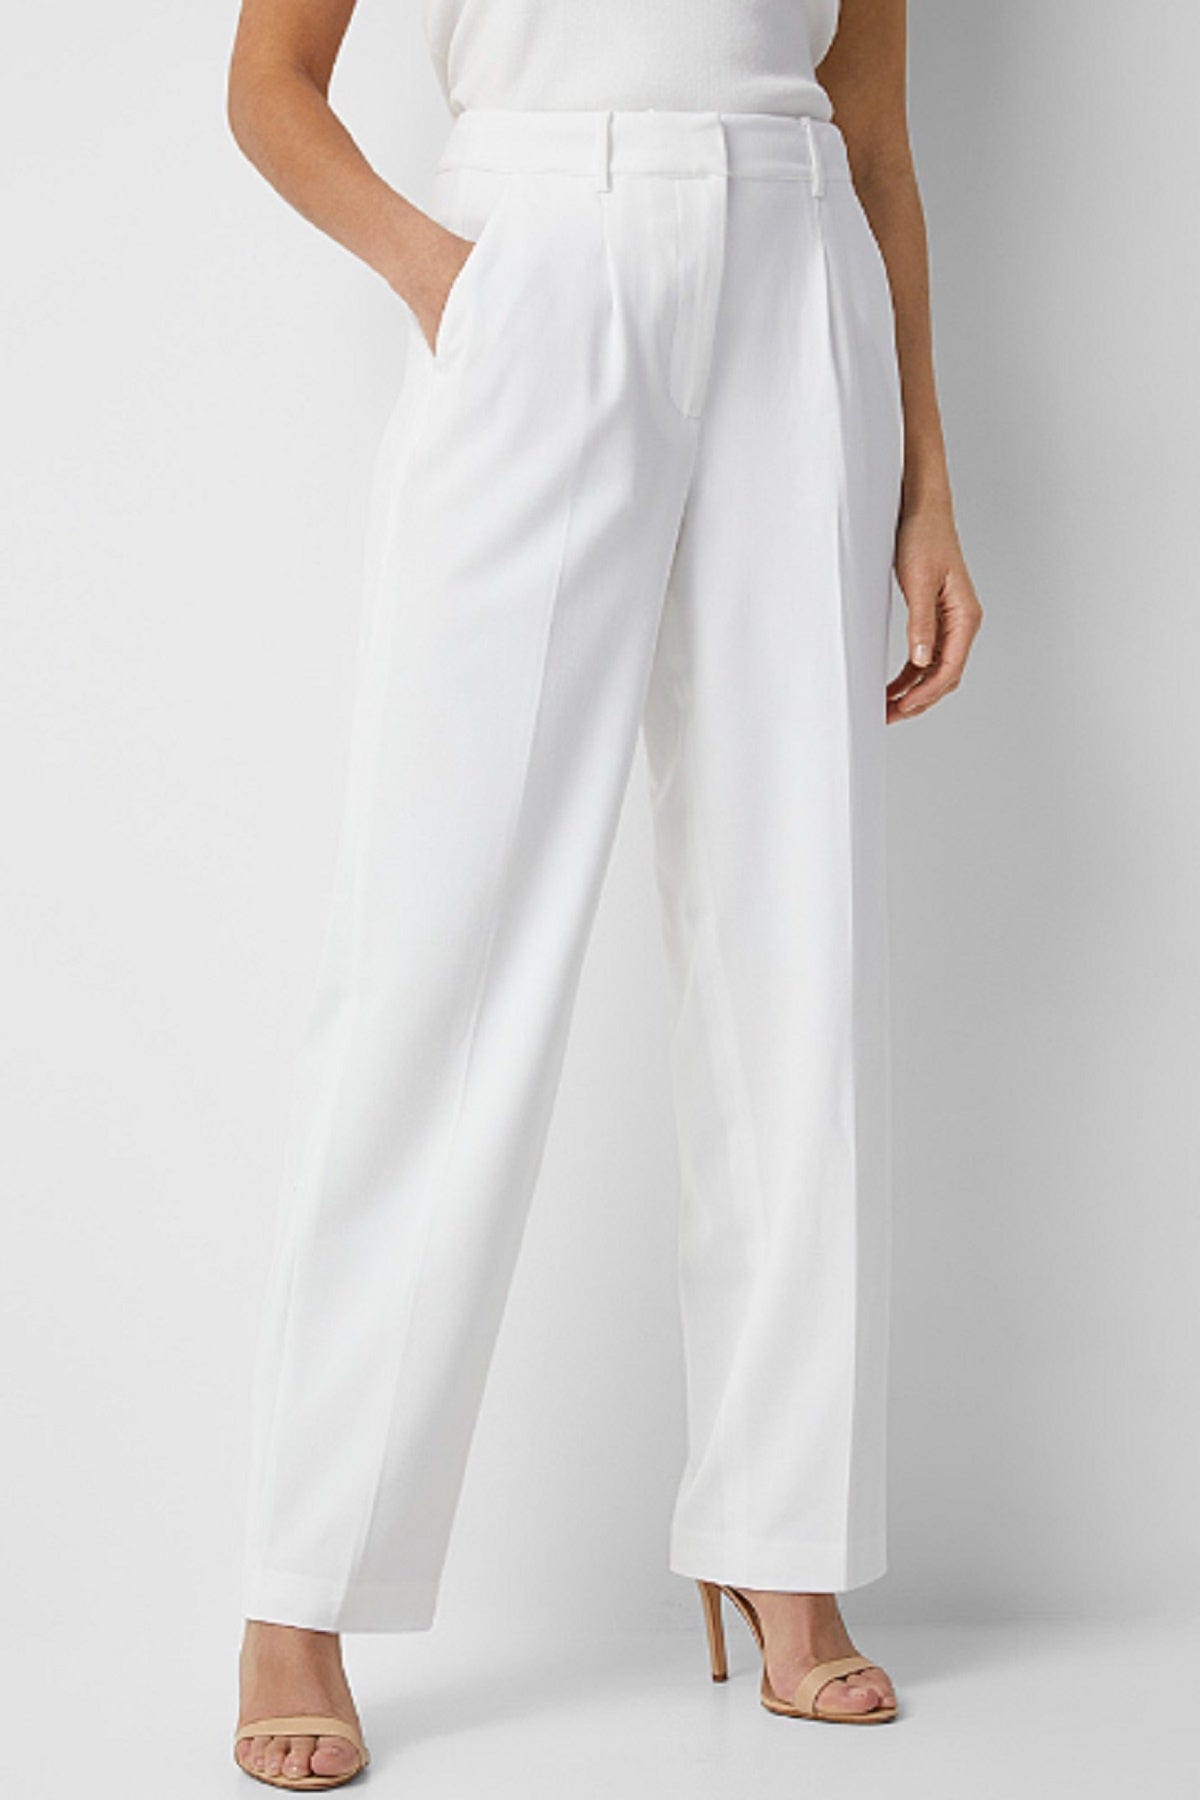 Michael Kors High Waist Crop Pants with Jetted Pockets women  Glamood  Outlet